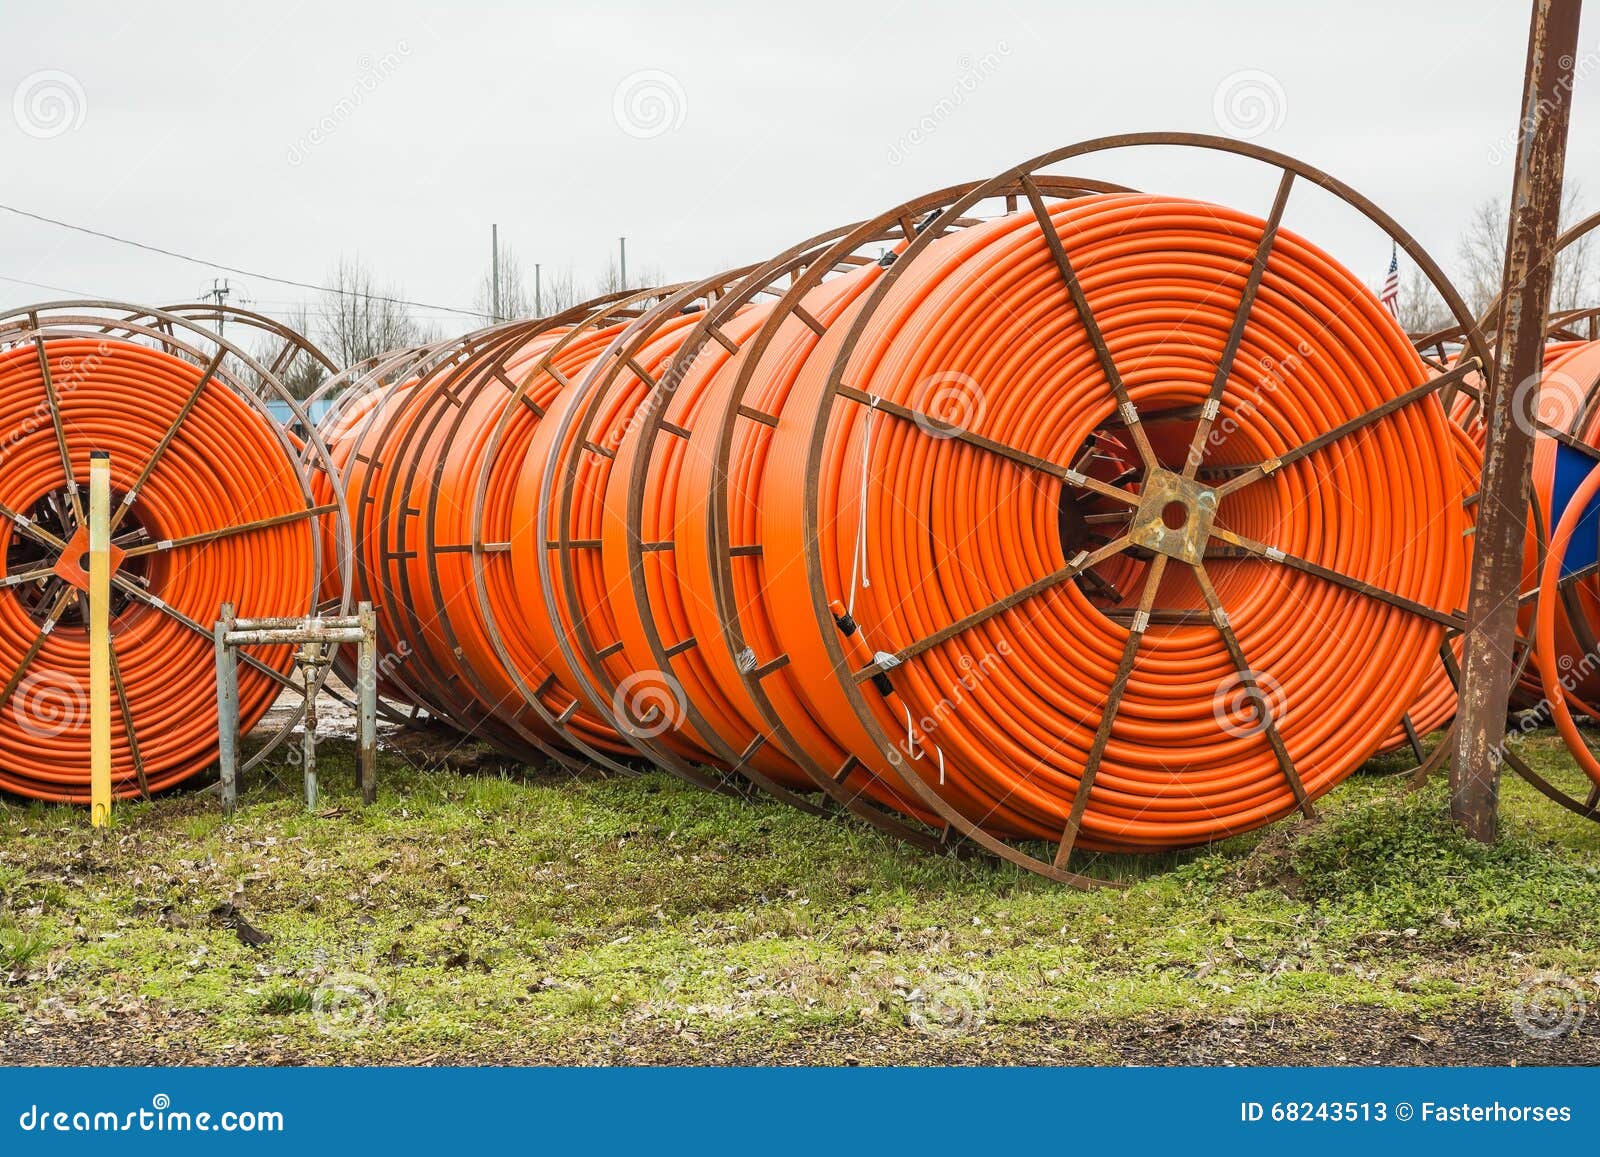 https://thumbs.dreamstime.com/z/conduit-reels-plastic-which-used-telephone-companies-burying-fiber-optic-cables-68243513.jpg